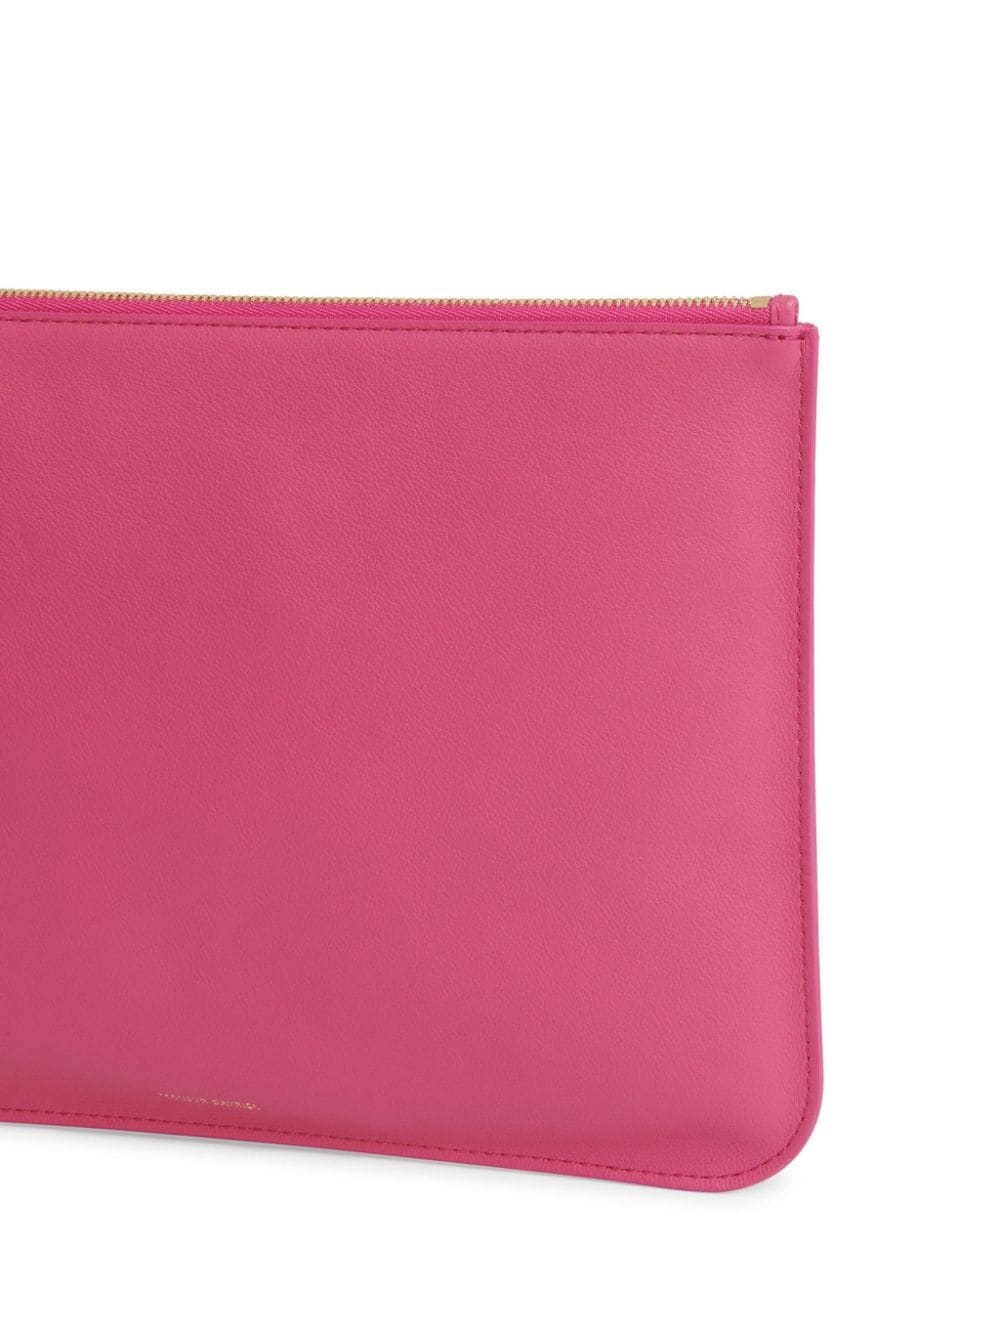 Everyday leather zipped clutch - 4